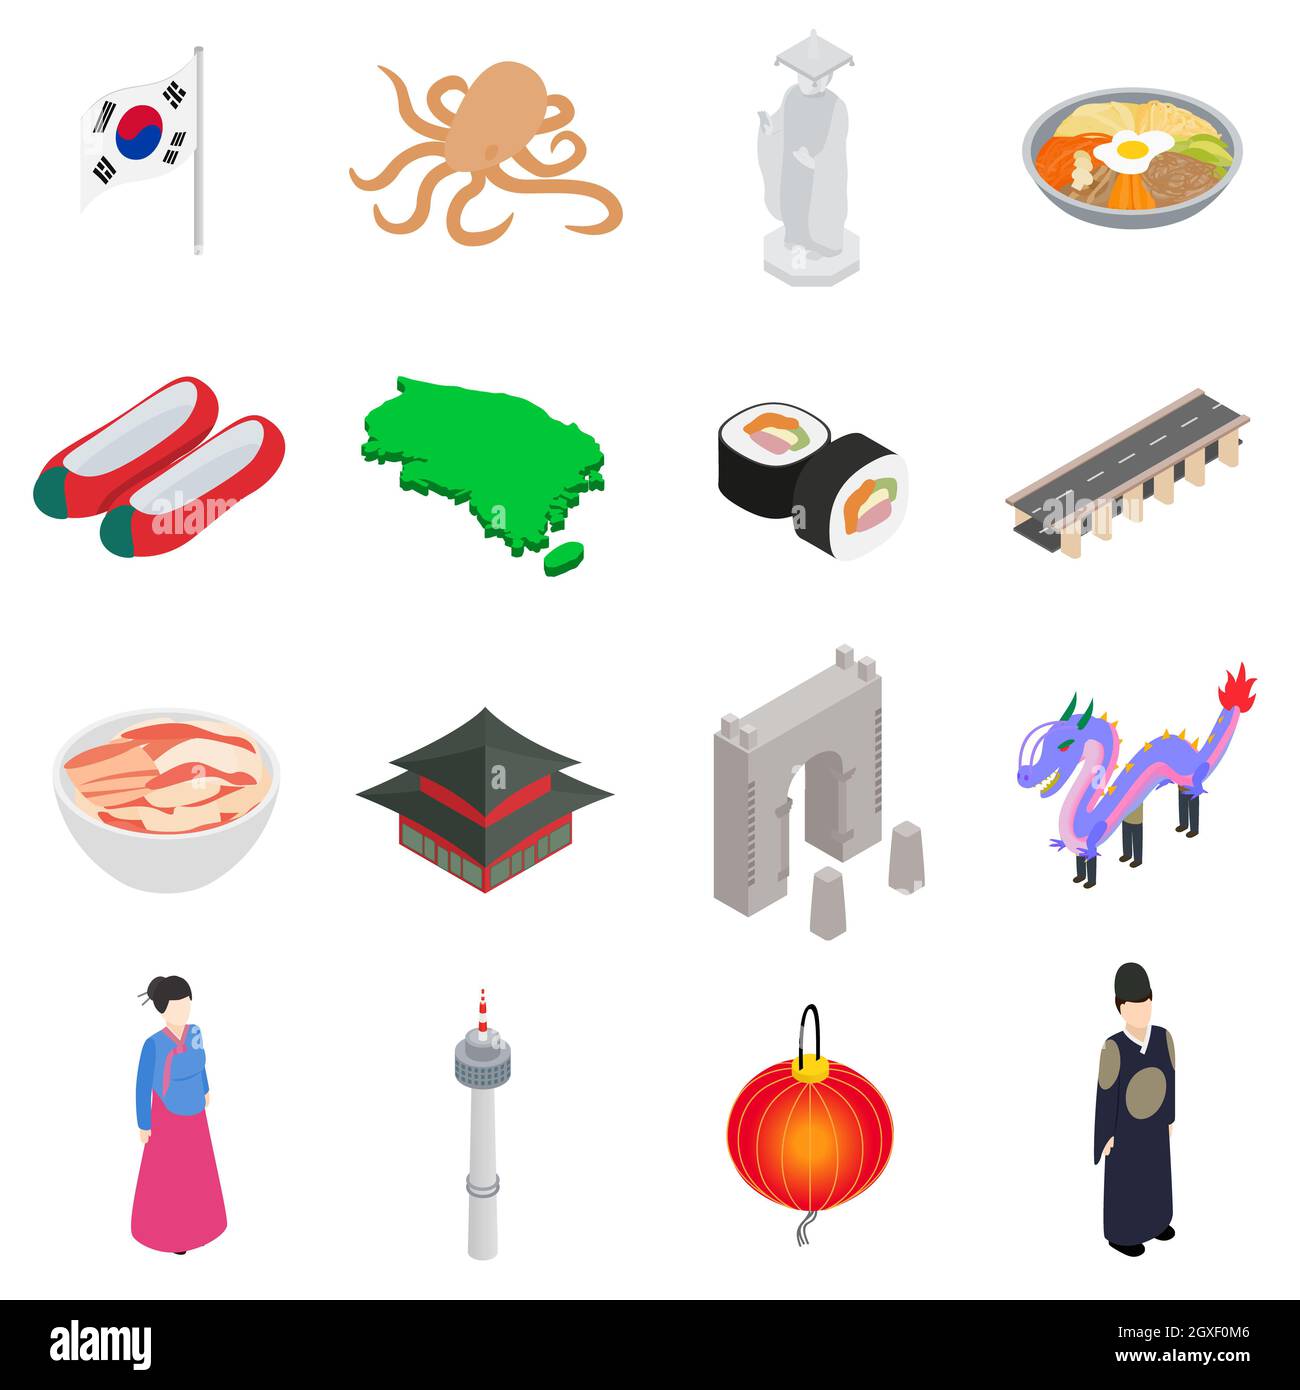 South Korea icons set in isometric 3d style isolated on white background Stock Photo